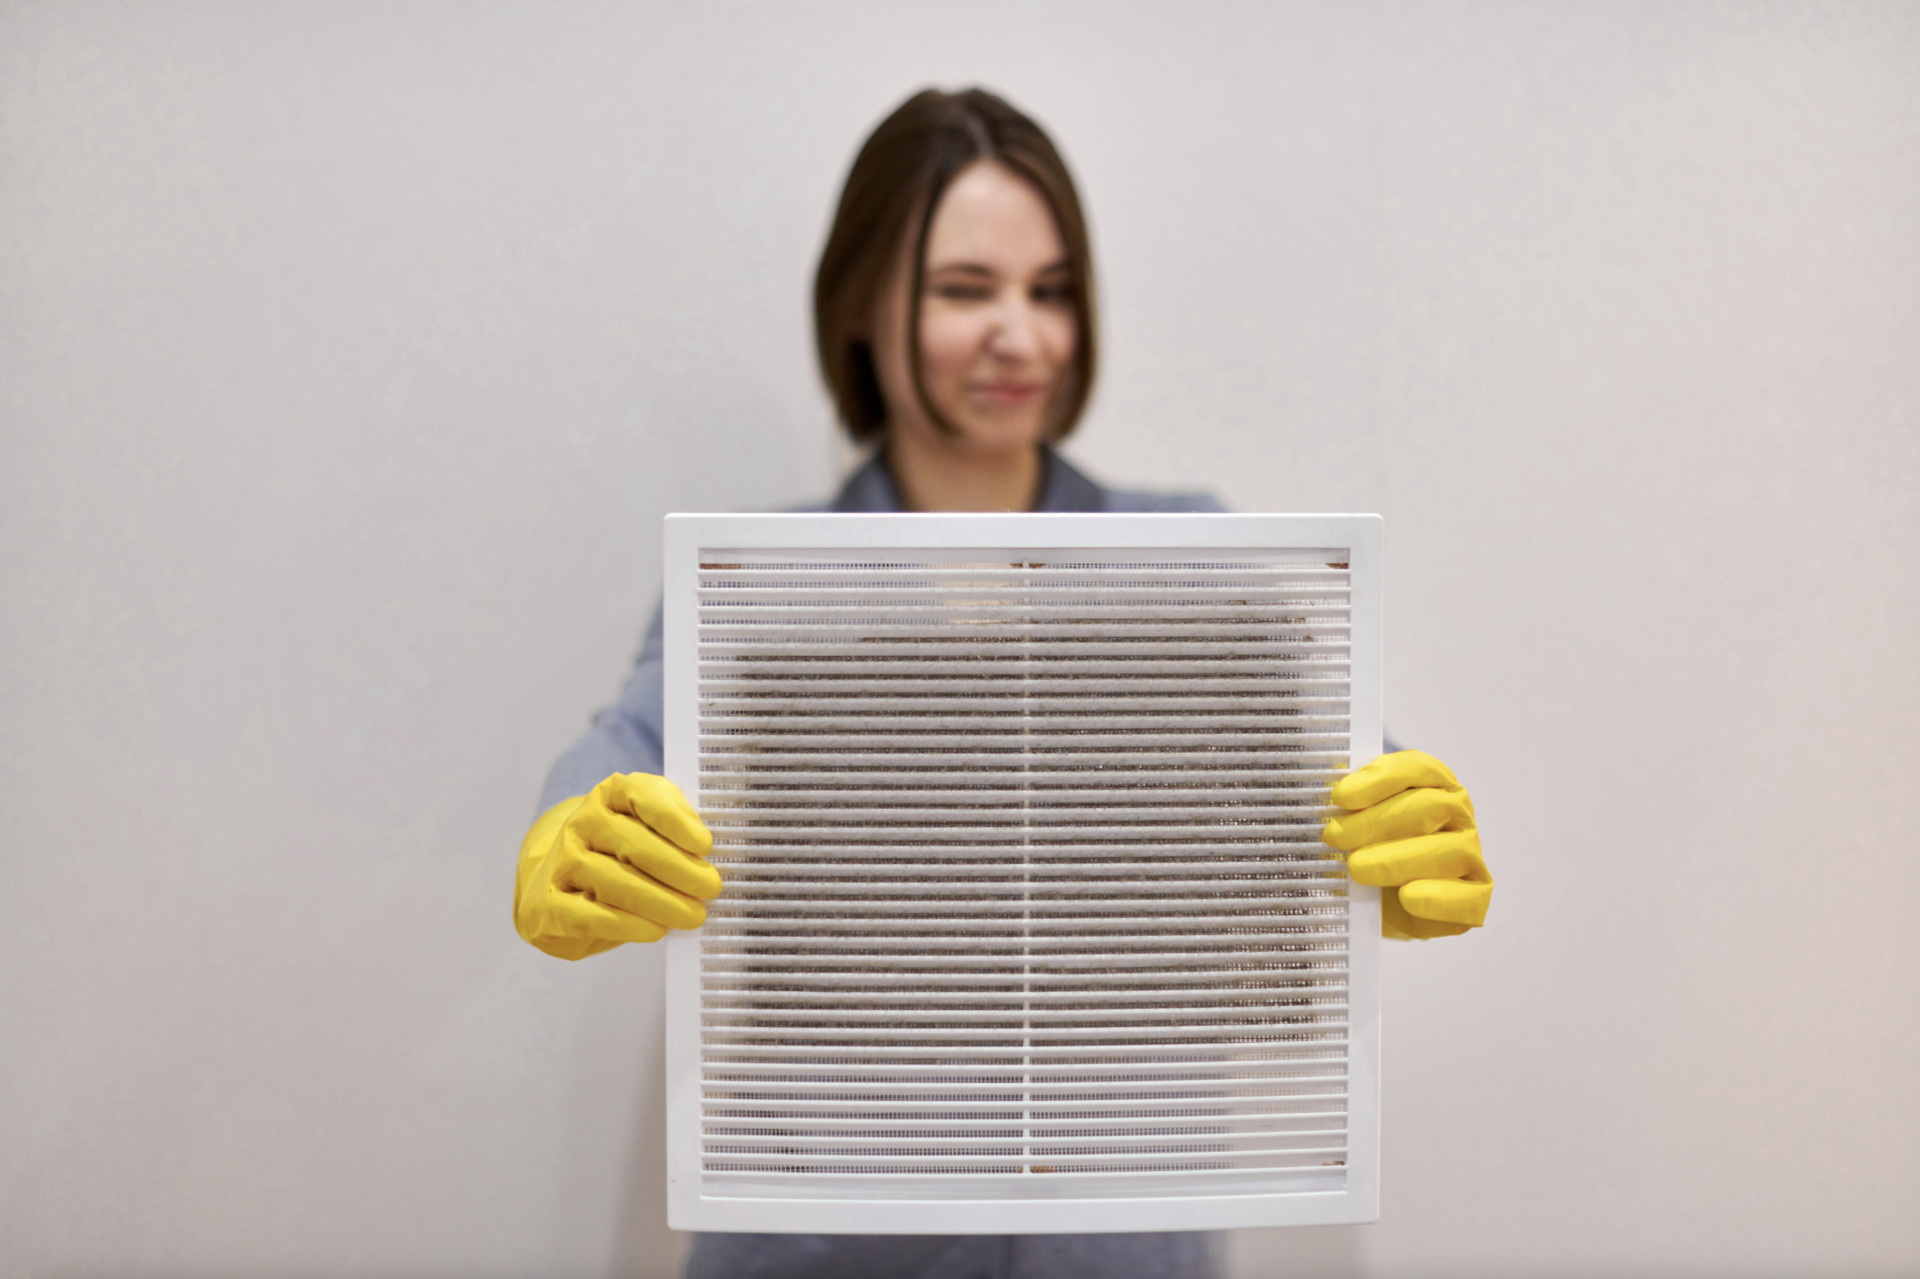 Dirty air filter that needs to be replaced